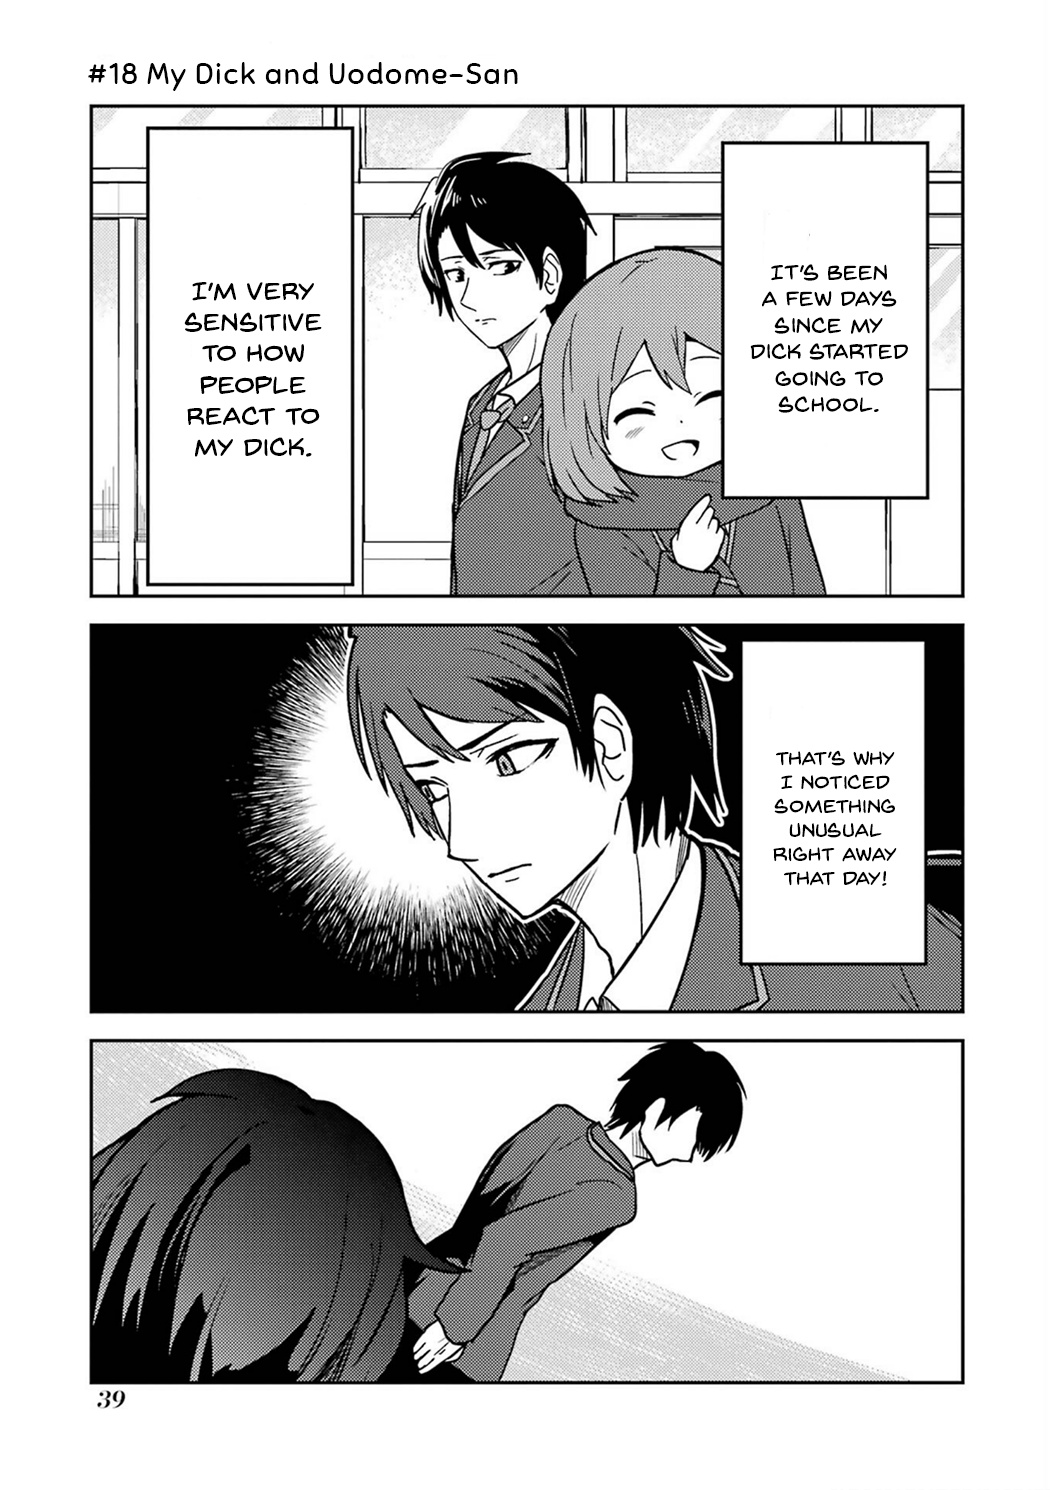 Turns Out My Dick Was A Cute Girl Vol.2 Chapter 18: My Dick And Uodome-San - Picture 1